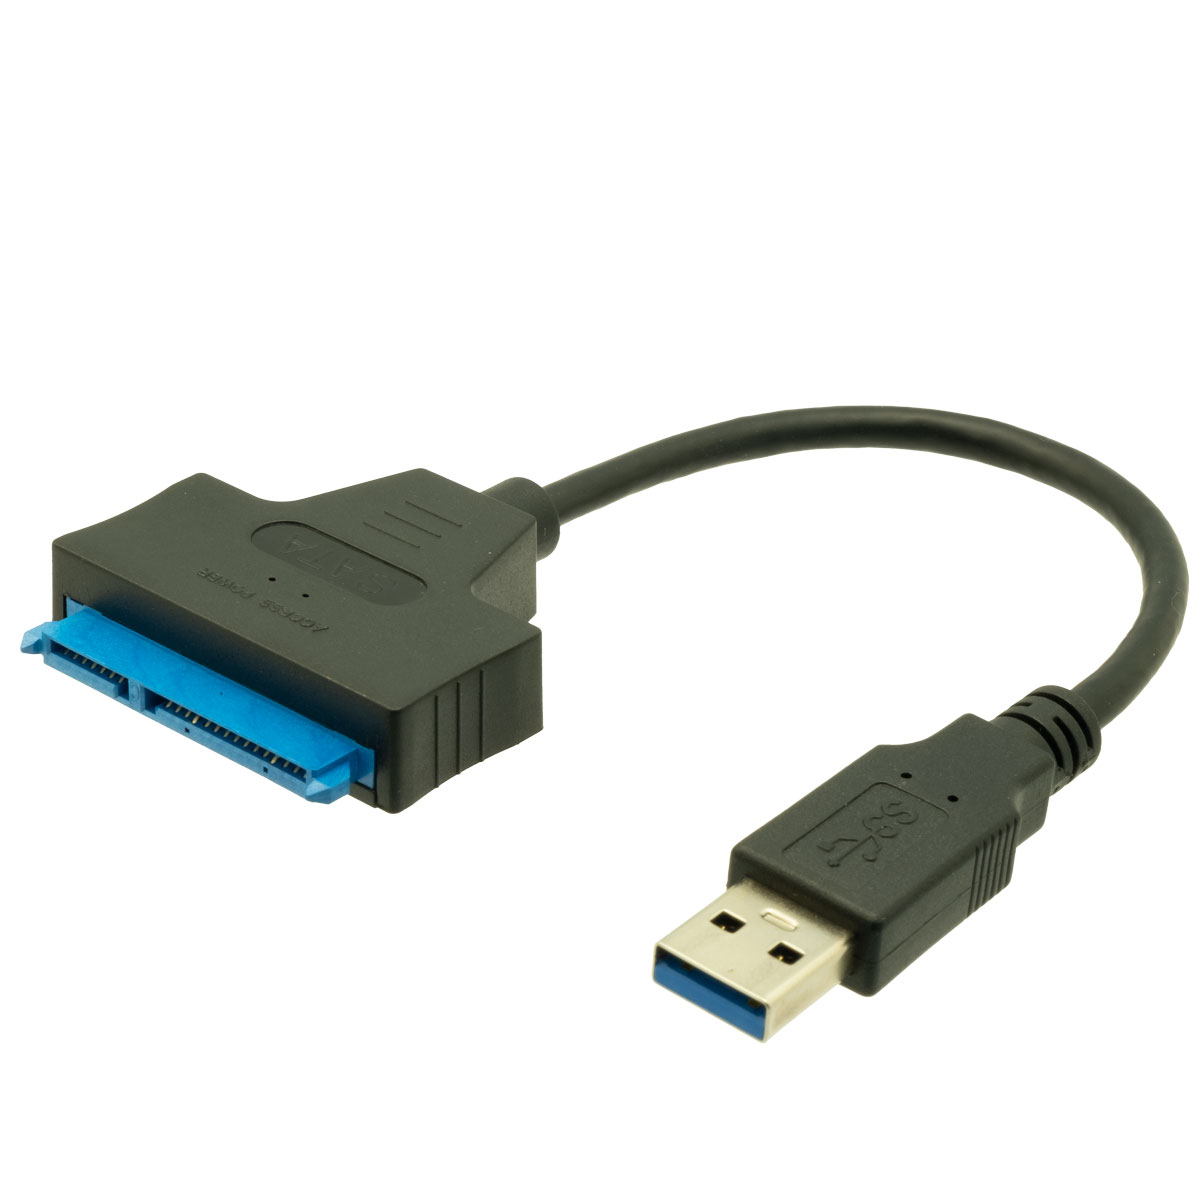 USB 3.0 to SATA, 0.3m. For 2.5" 5v HDD